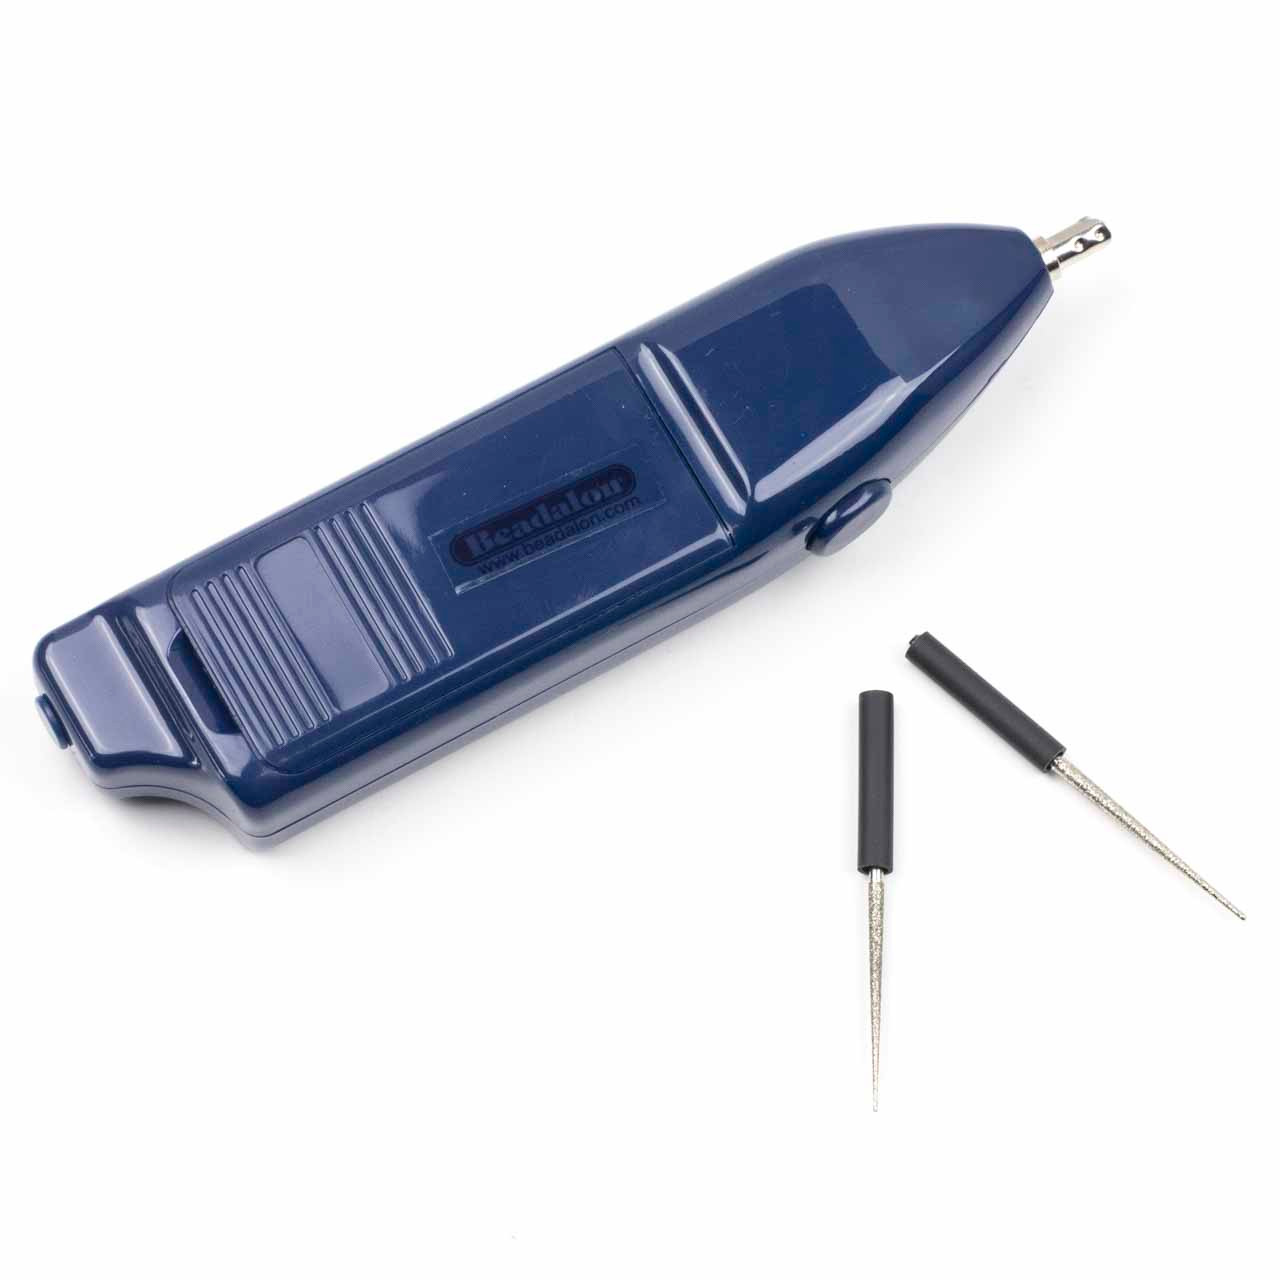 Battery Operated Bead Reamer - Jesse James Beads